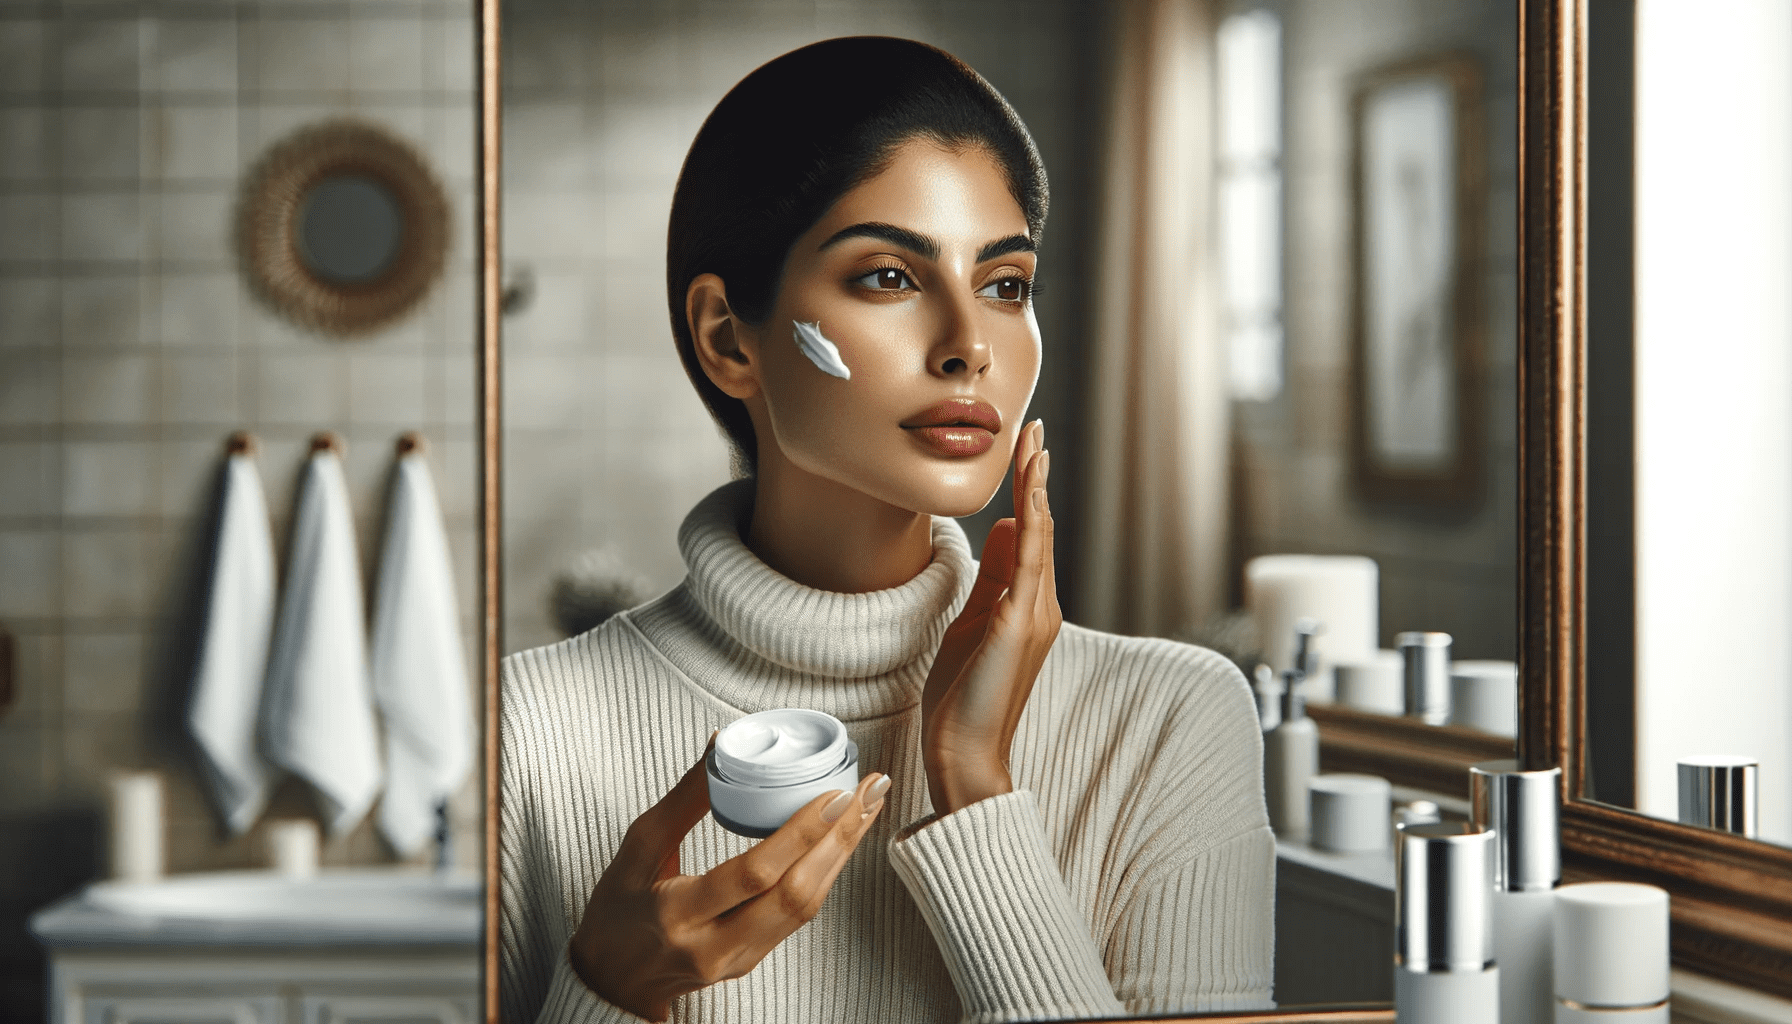 The Viral Skincare Trend: How Niacinamide and Tretinoin are Changing the Game